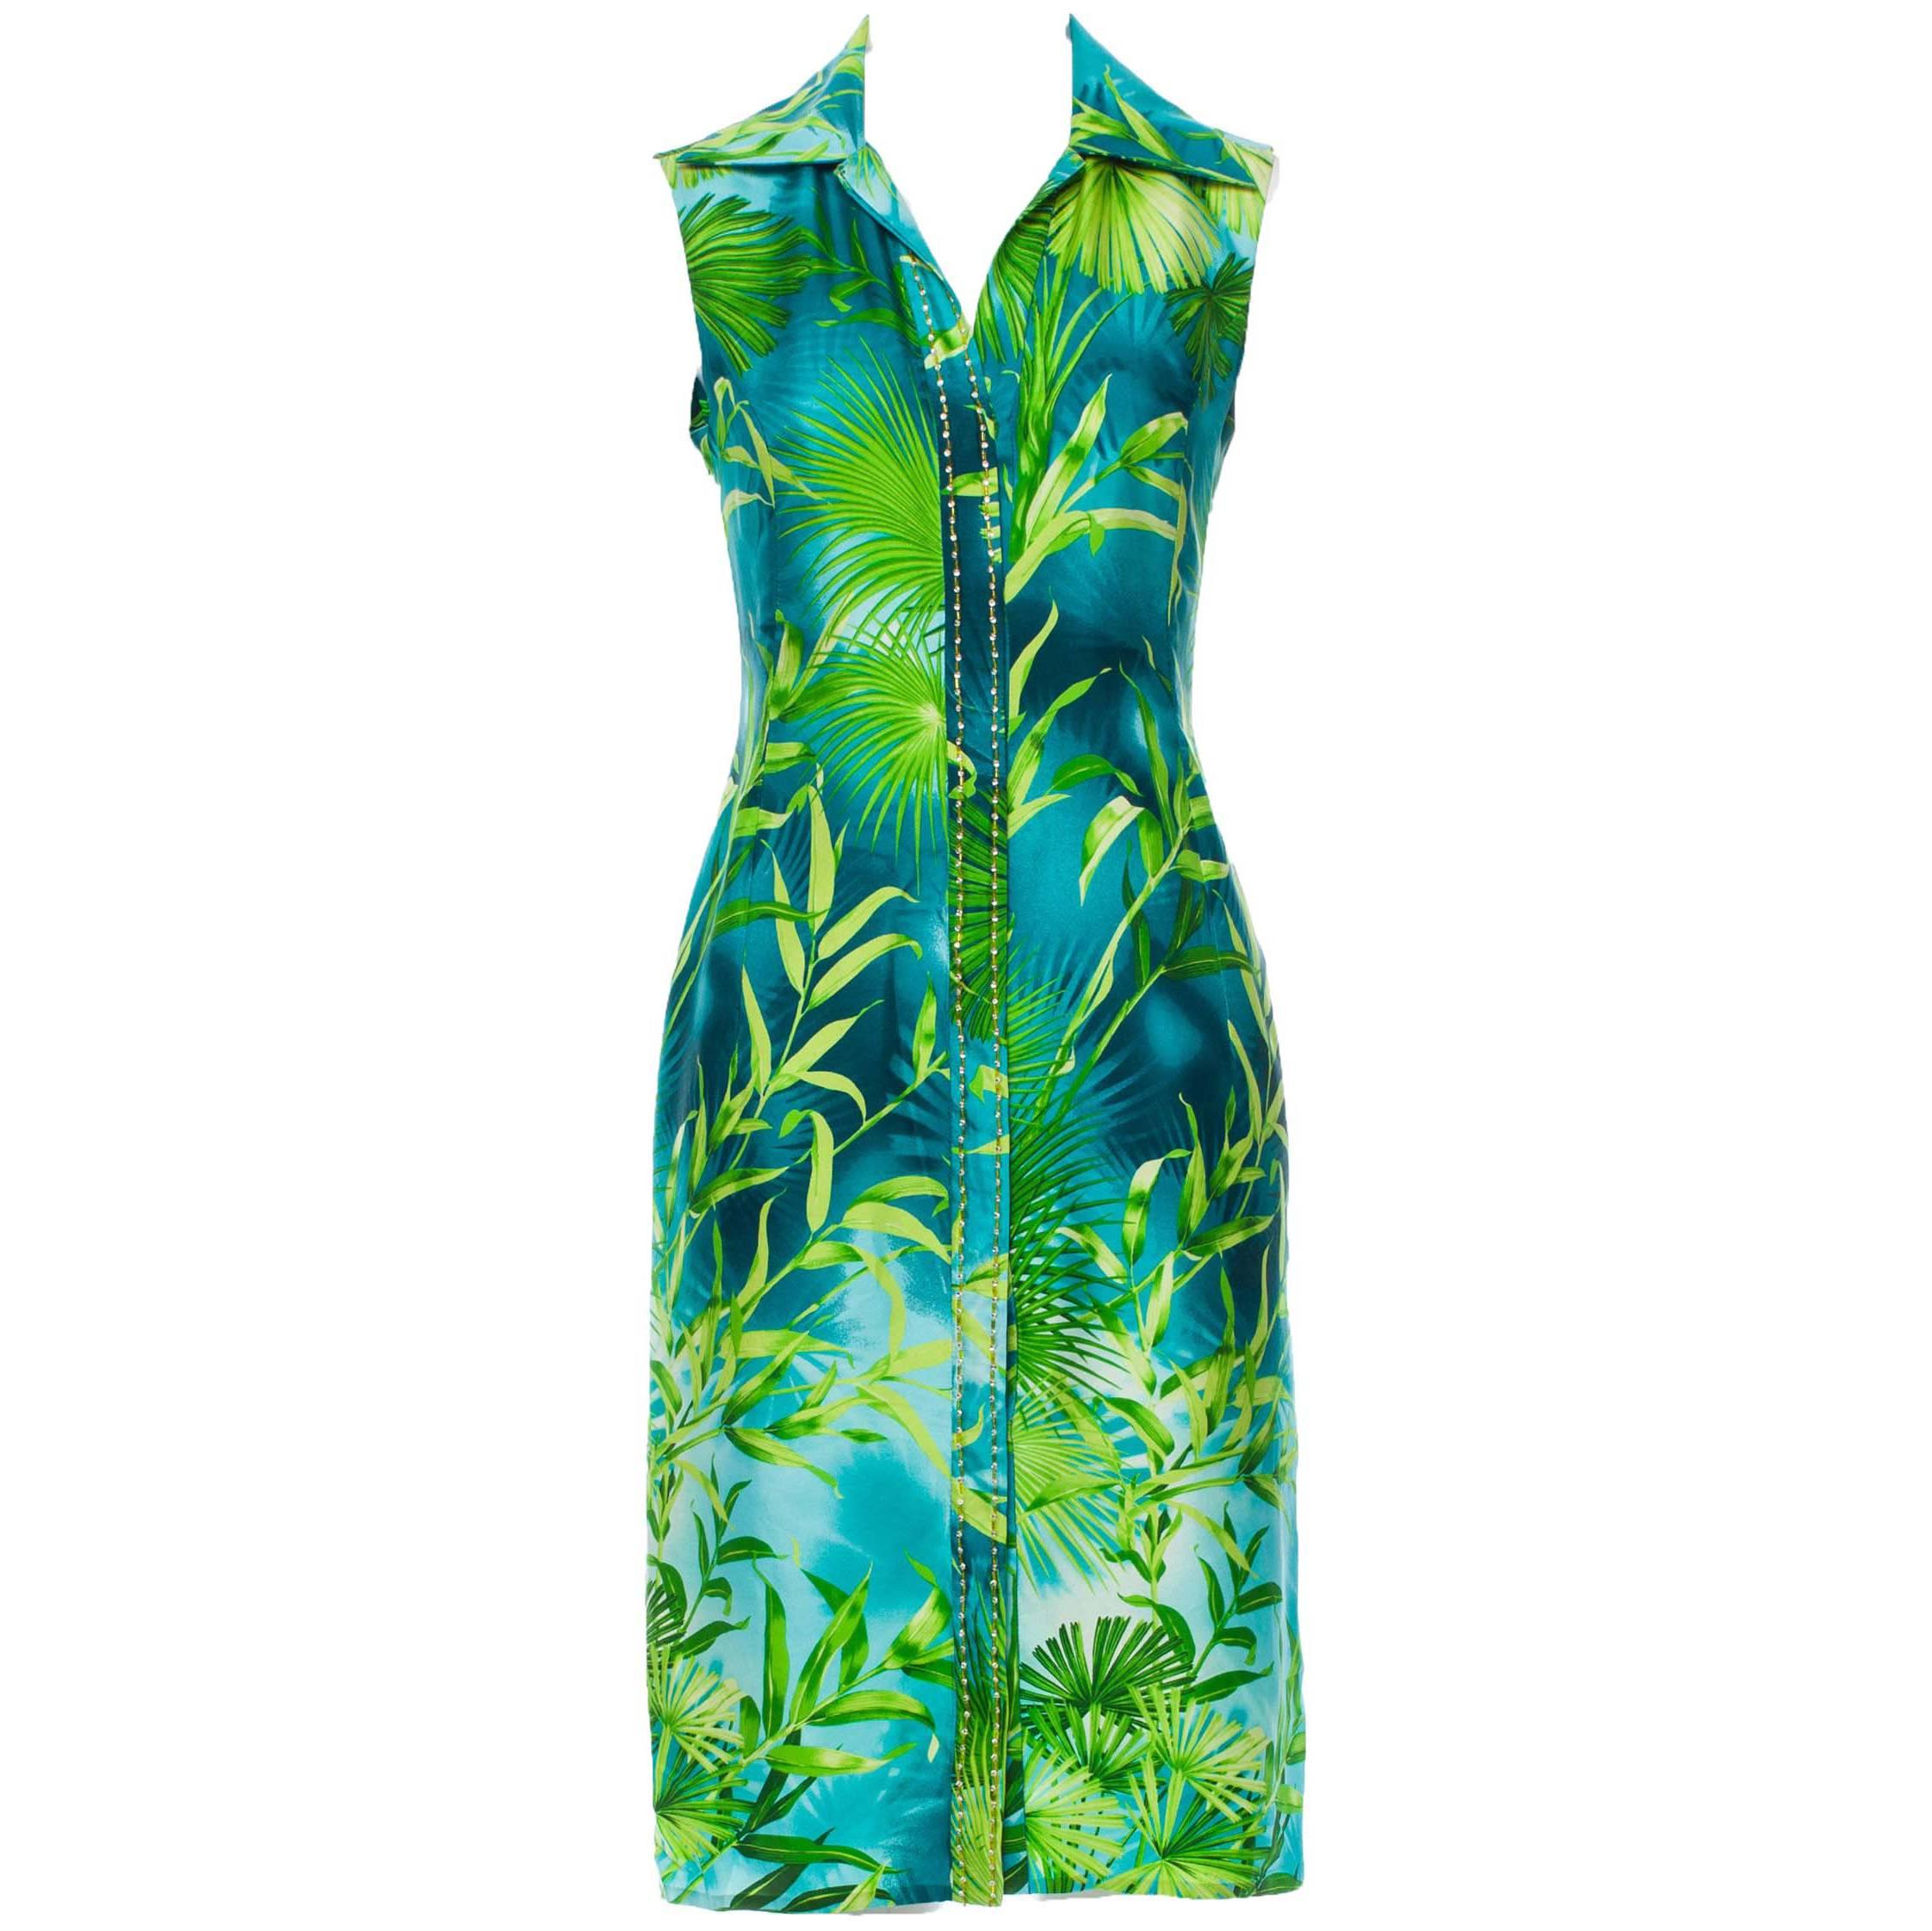 Iconic Gianni Versace Couture S/S 2000 Jungle Print Silk Embellished Dress It.38